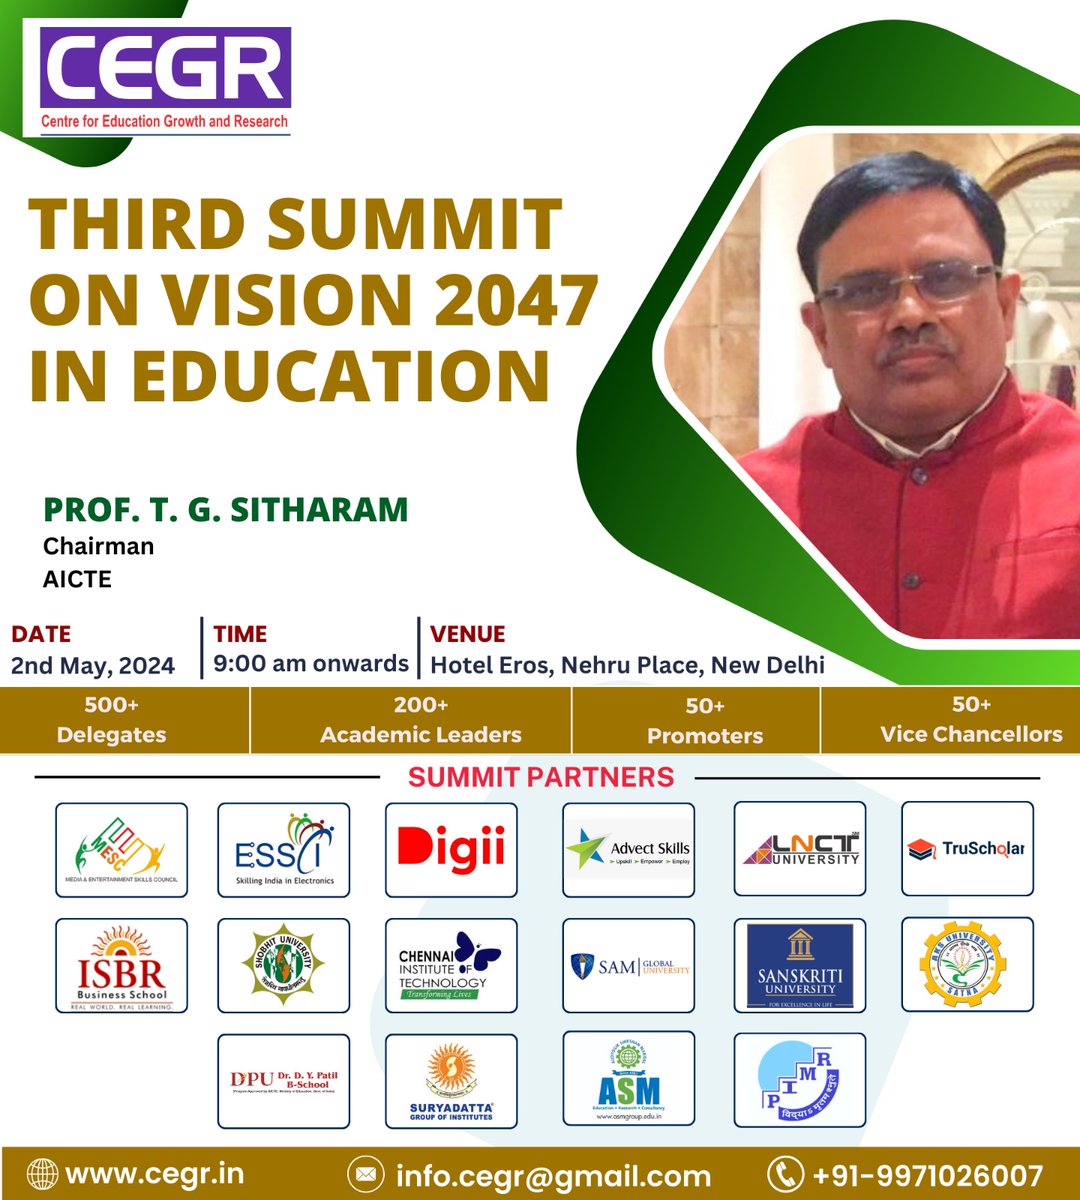 We are delighted to Welcome Prof. T. G. Sitharam, Chairman, AICTE in Third Summit on Vision 2047 in Education on 2nd May, 2024 (Thursday) in Royal Ball Room, Hotel Eros, Nehru Place, New Delhi. To Know more, please visit cegr.in/events.php #CEGR #CEGRLeads #cegrindia